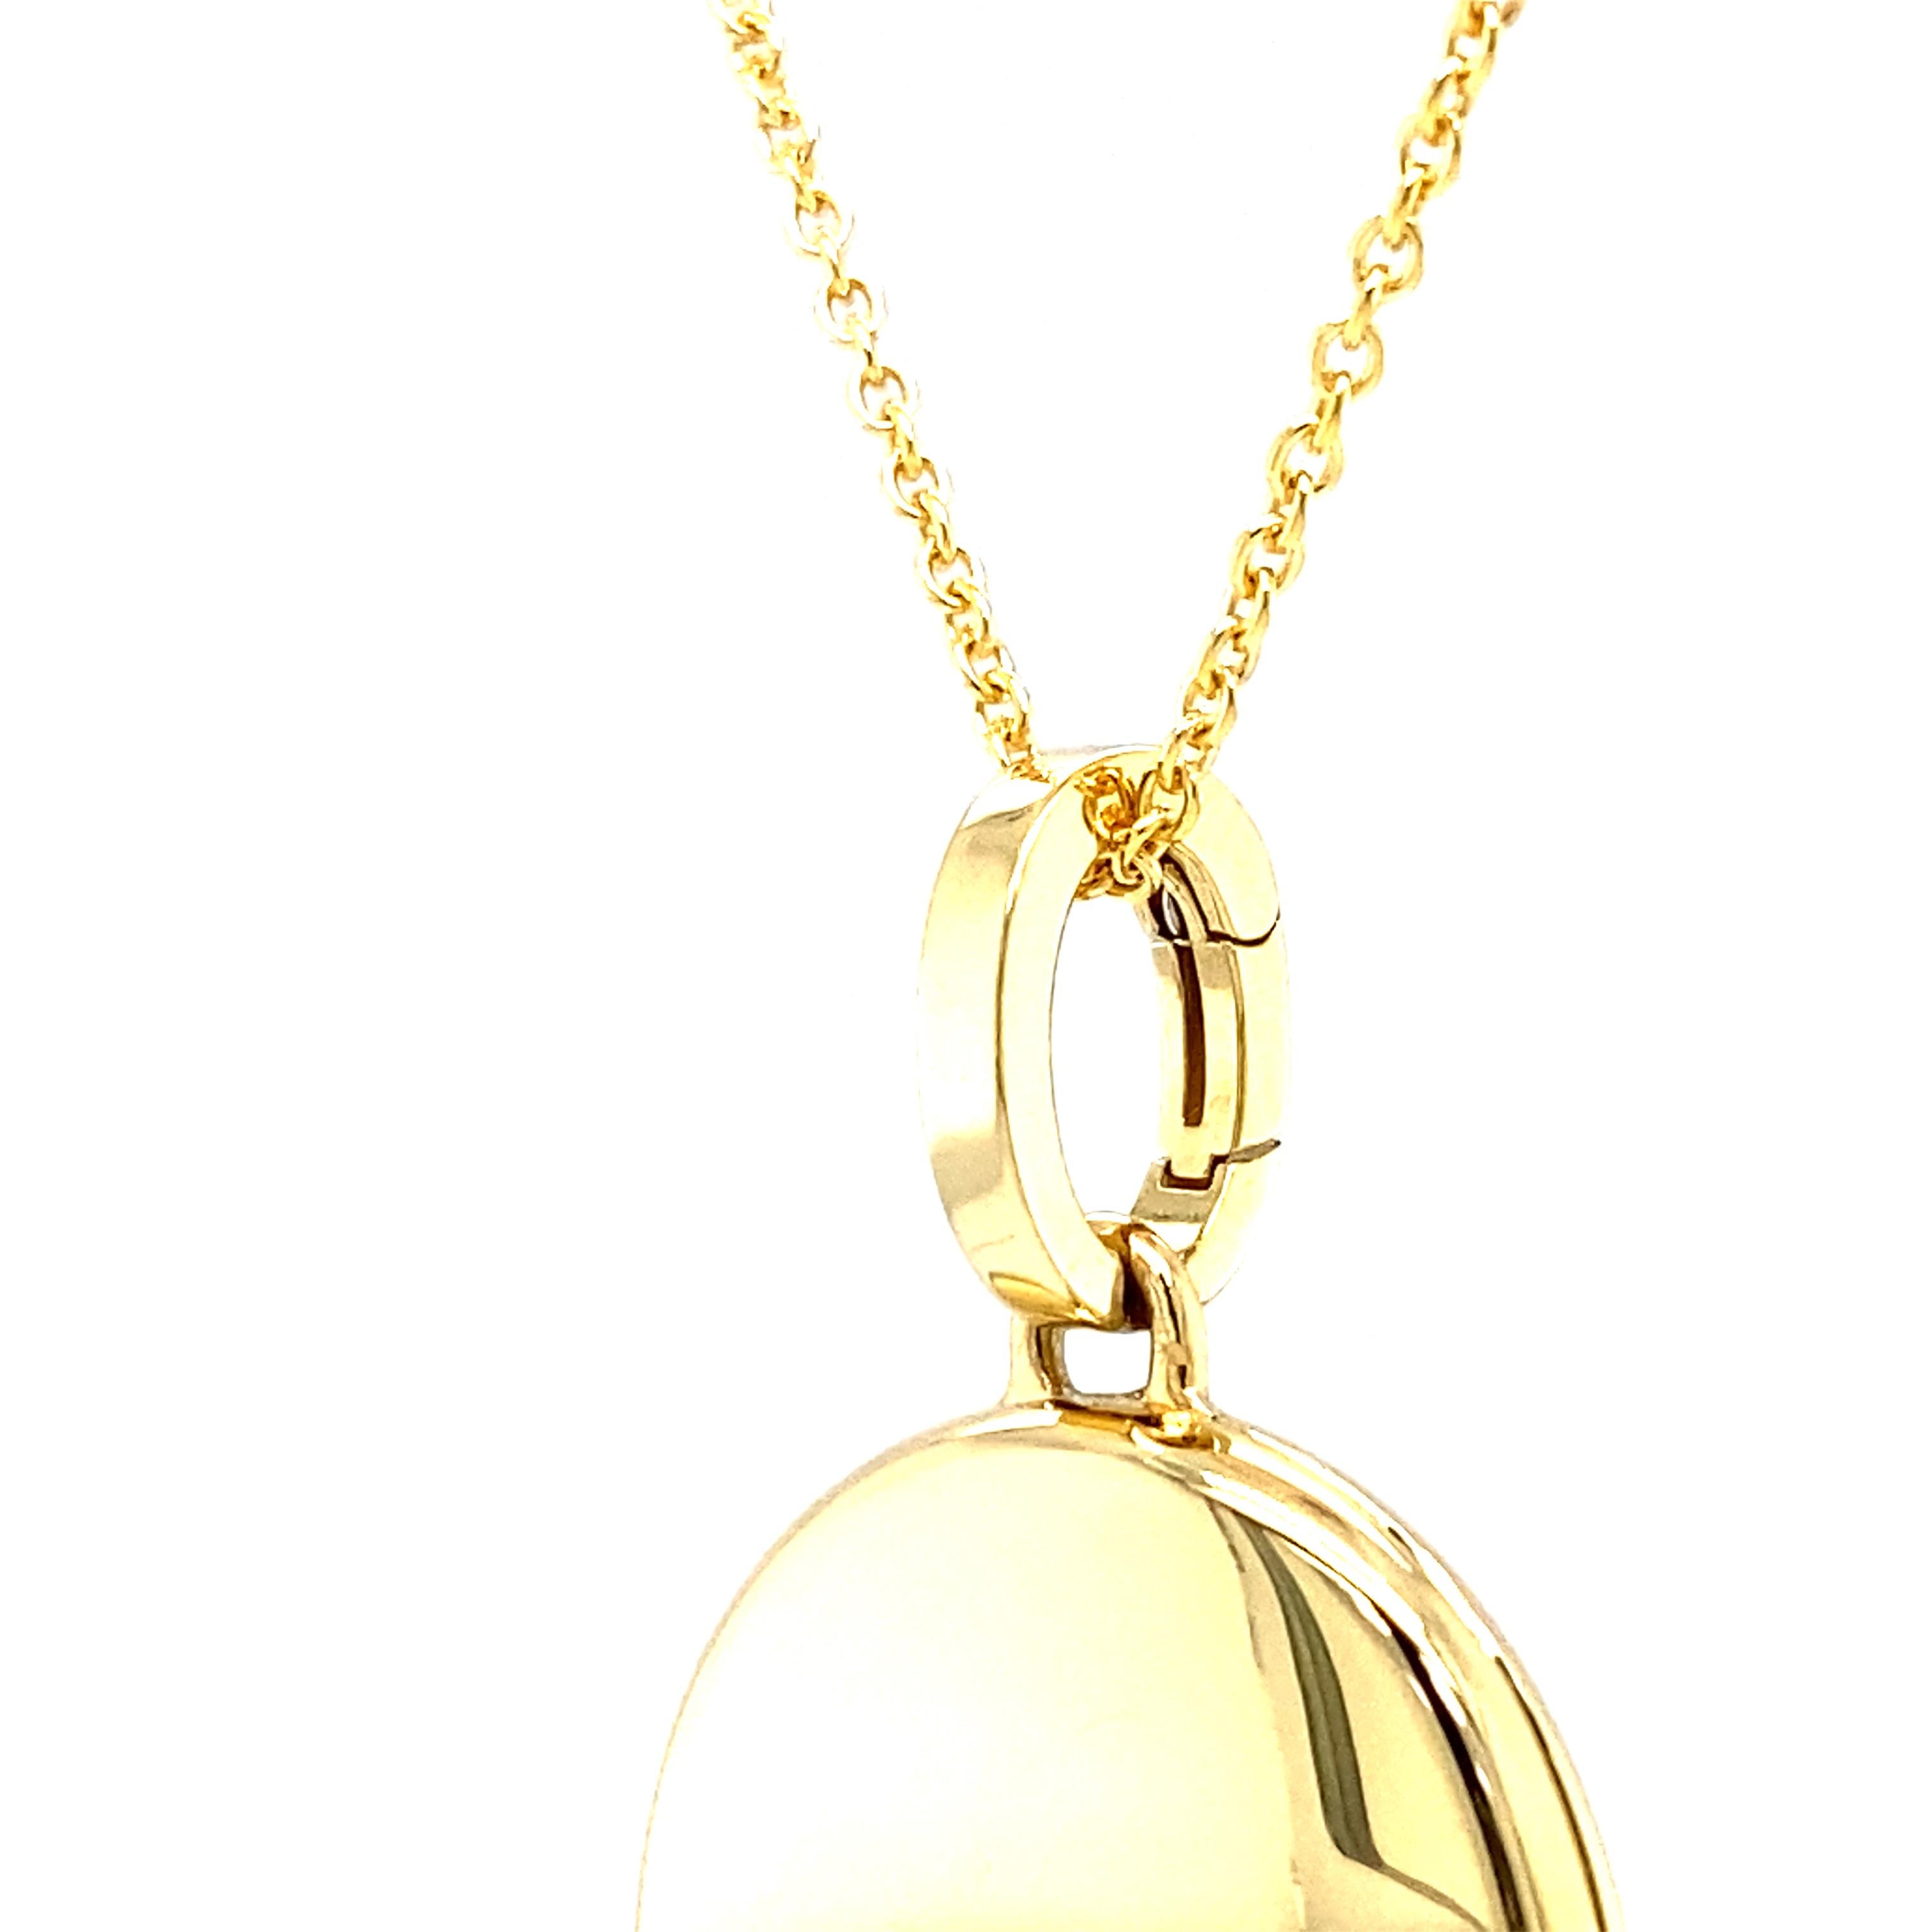 Customizable Oval Polished Pendant Locket Necklace 18k Yellow Gold 23 mm x 20 mm For Sale 1